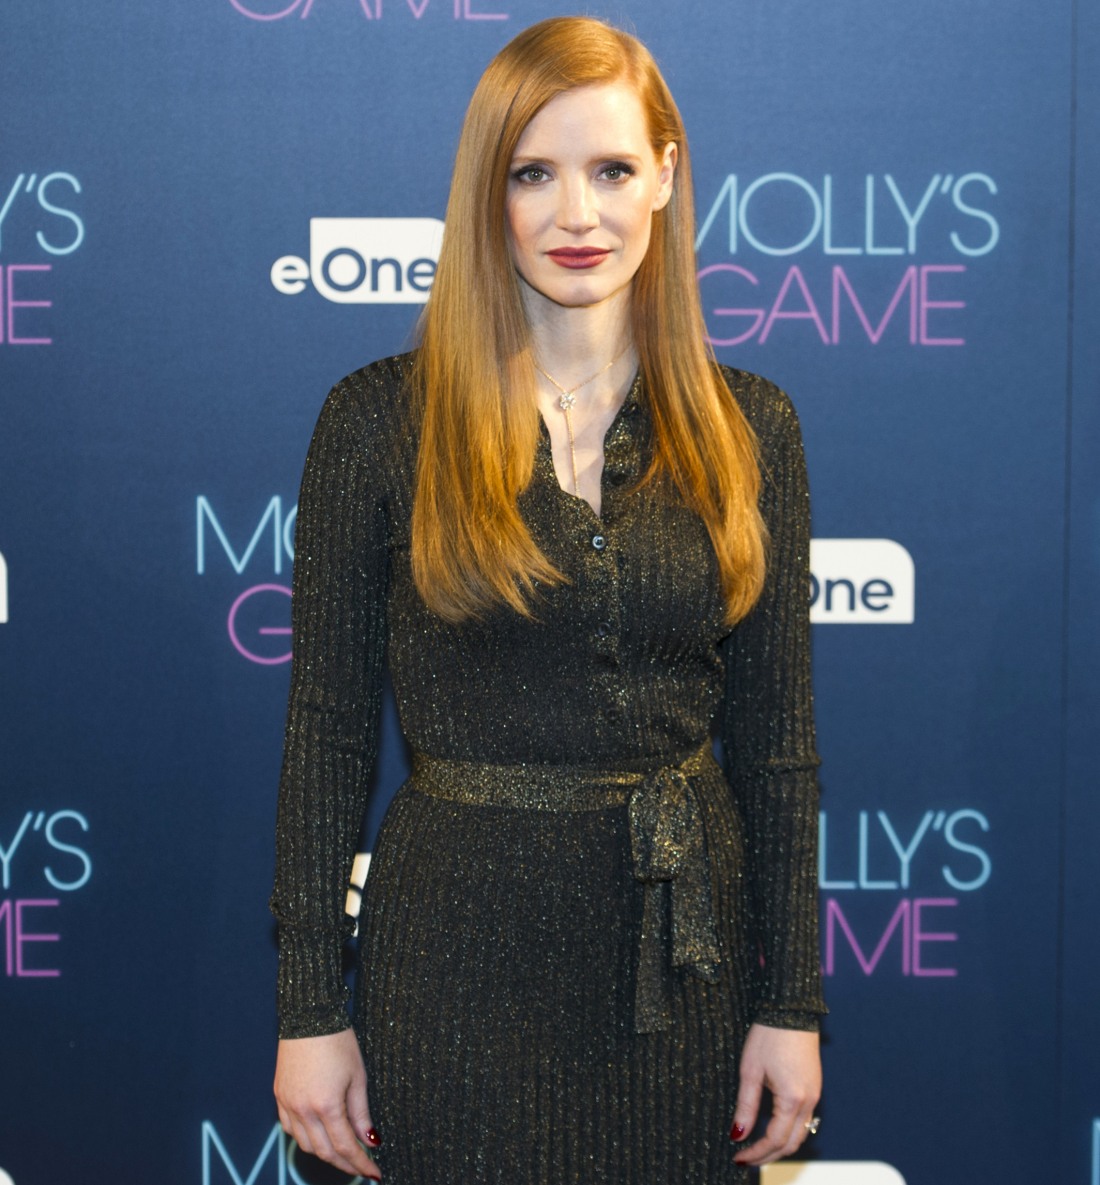 Madrid photocall for 'Molly's Game'